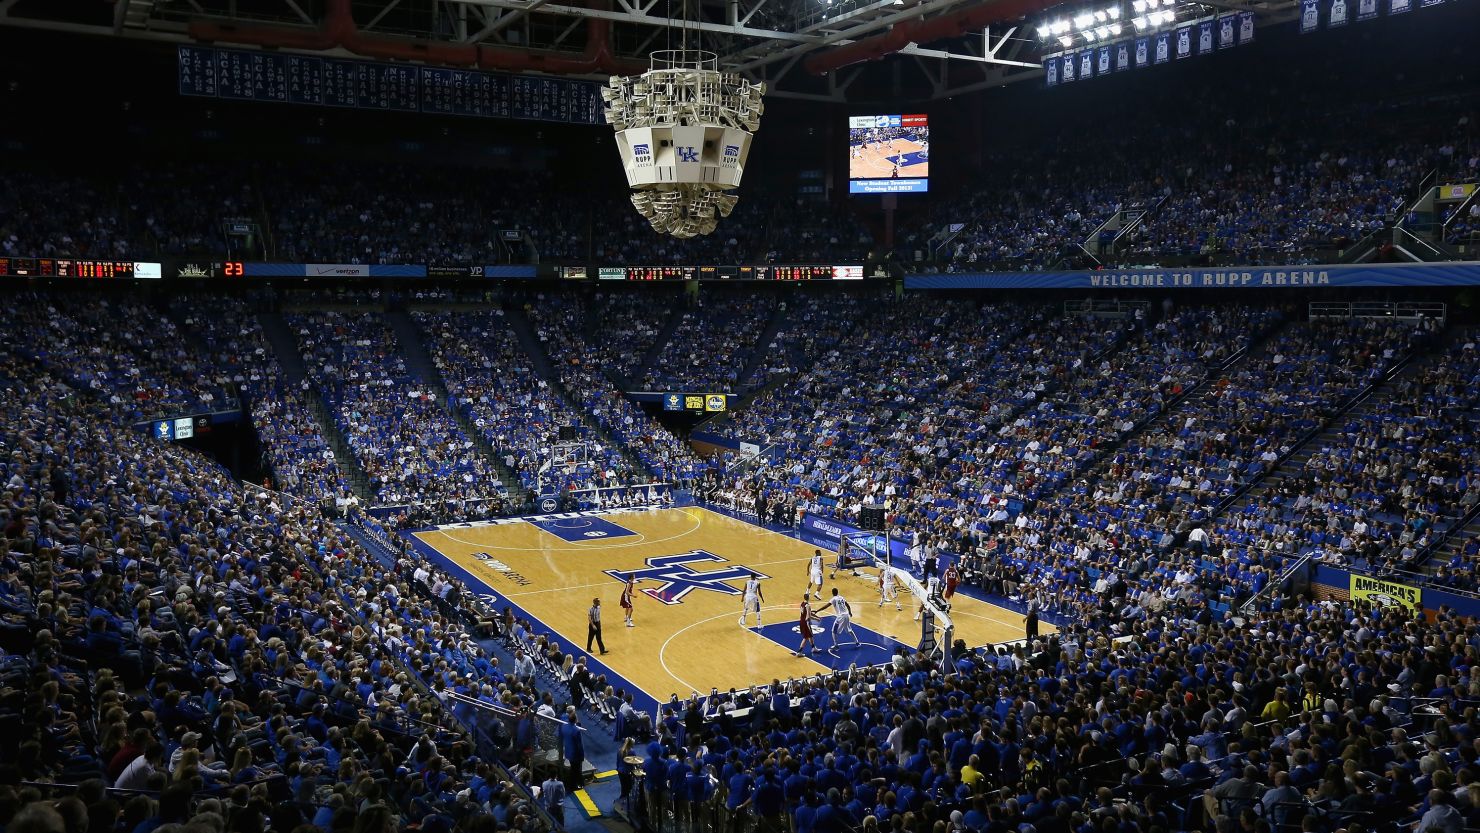 Rupp Arena, home of the University of Kentucky's basketball team, is among the campus buildings some faculty want to rename.
